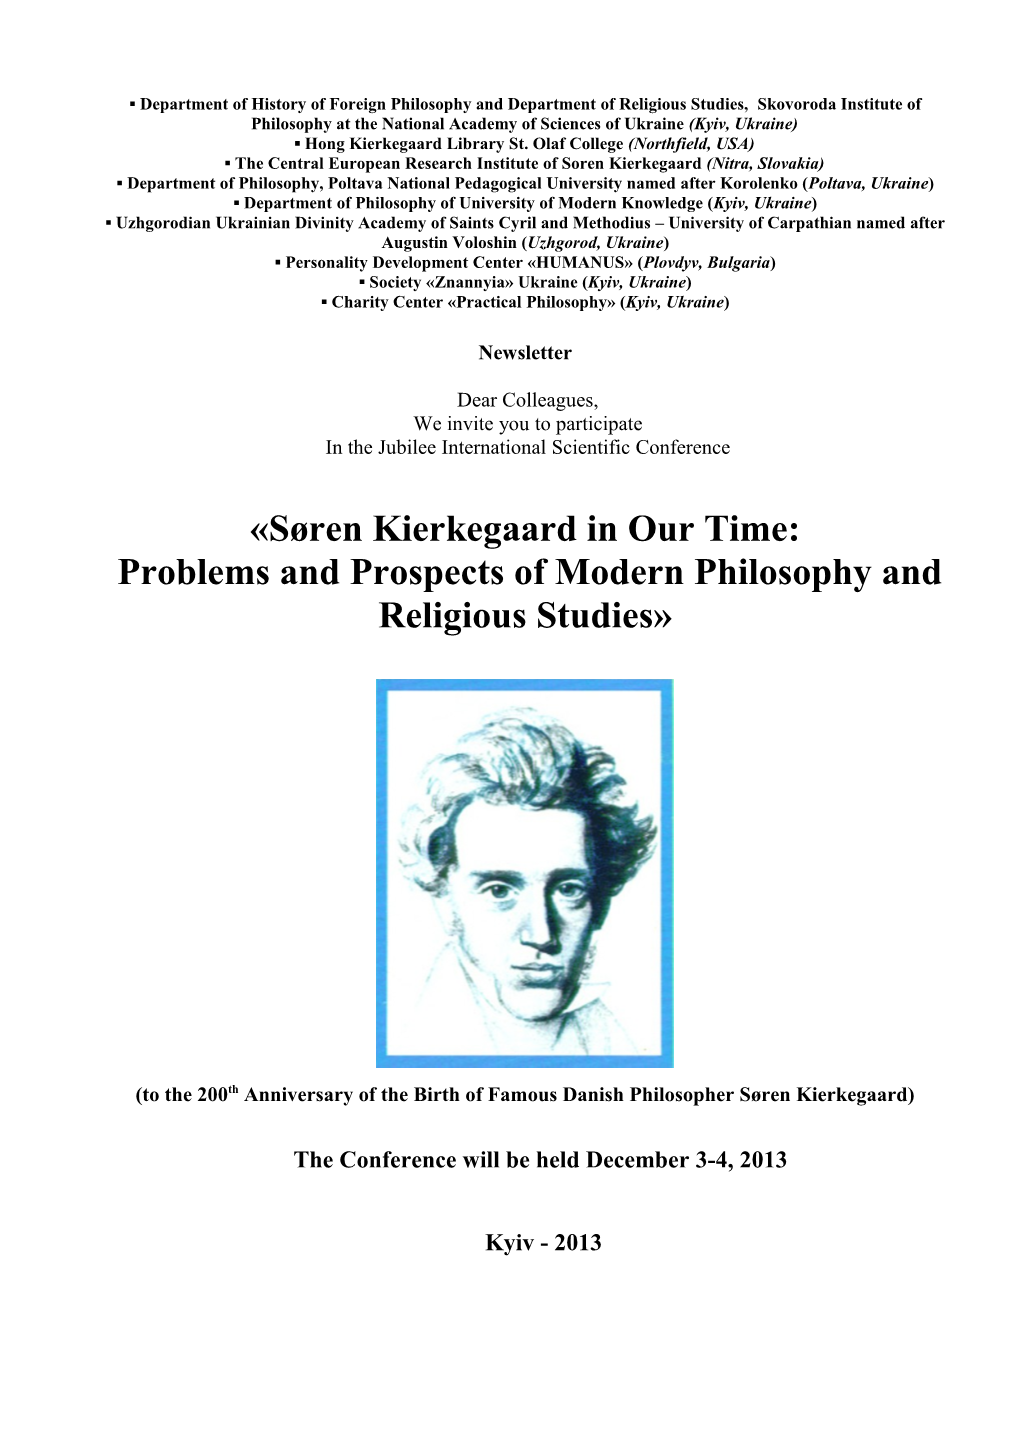 S.Kierkegaard S Philosophy and Spiritual Heritage of Generations: Problems of Common Human